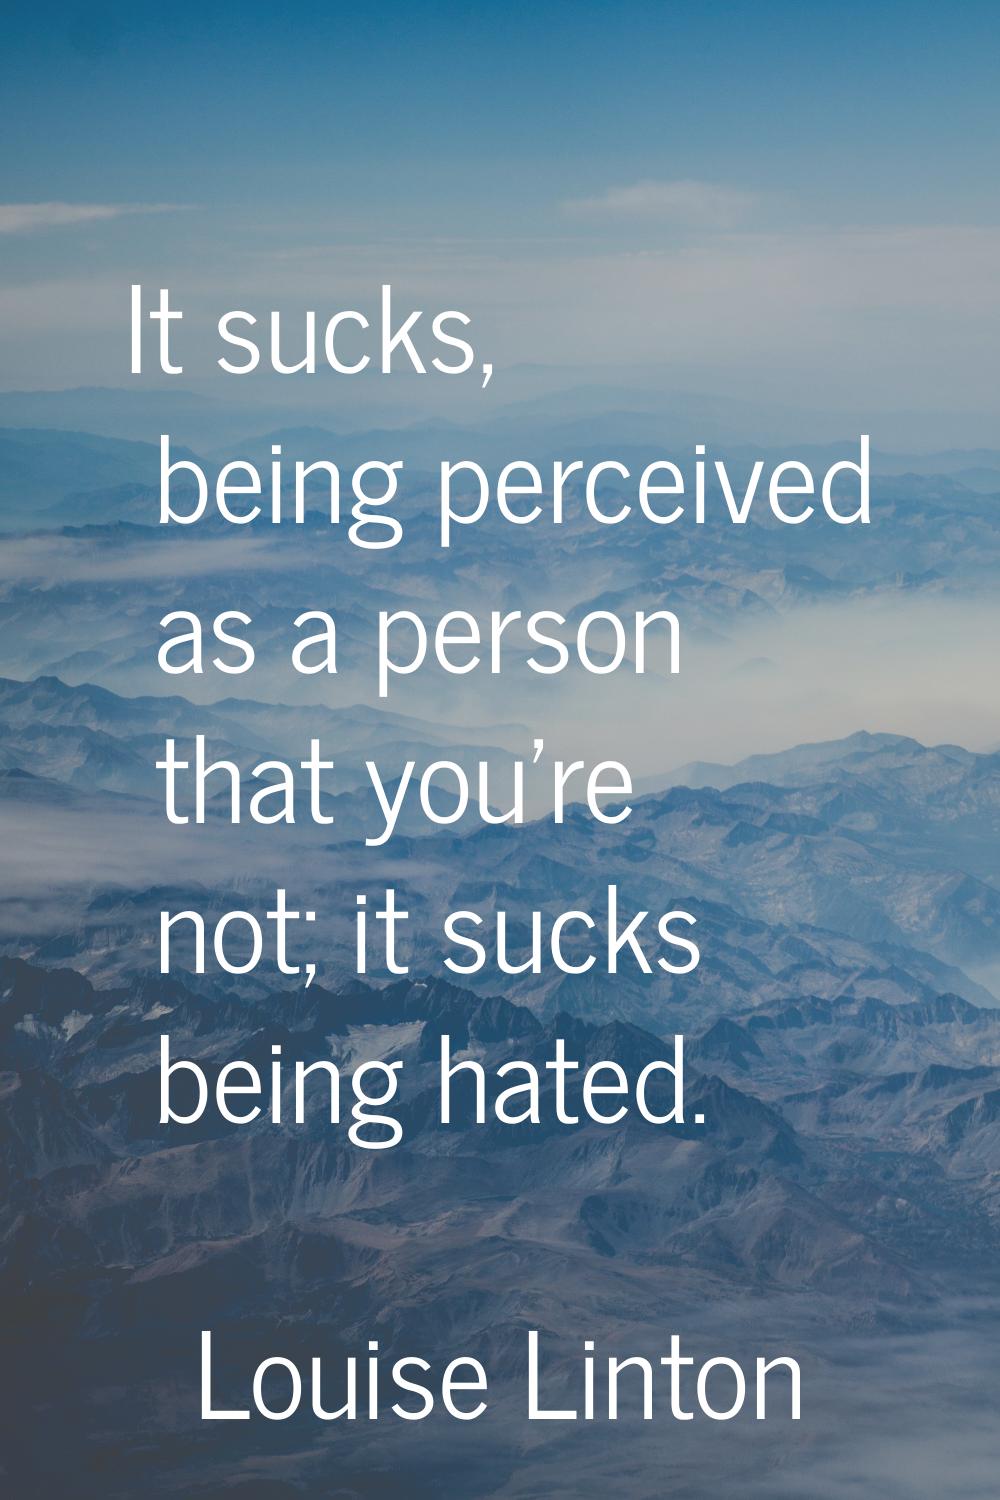 It sucks, being perceived as a person that you're not; it sucks being hated.